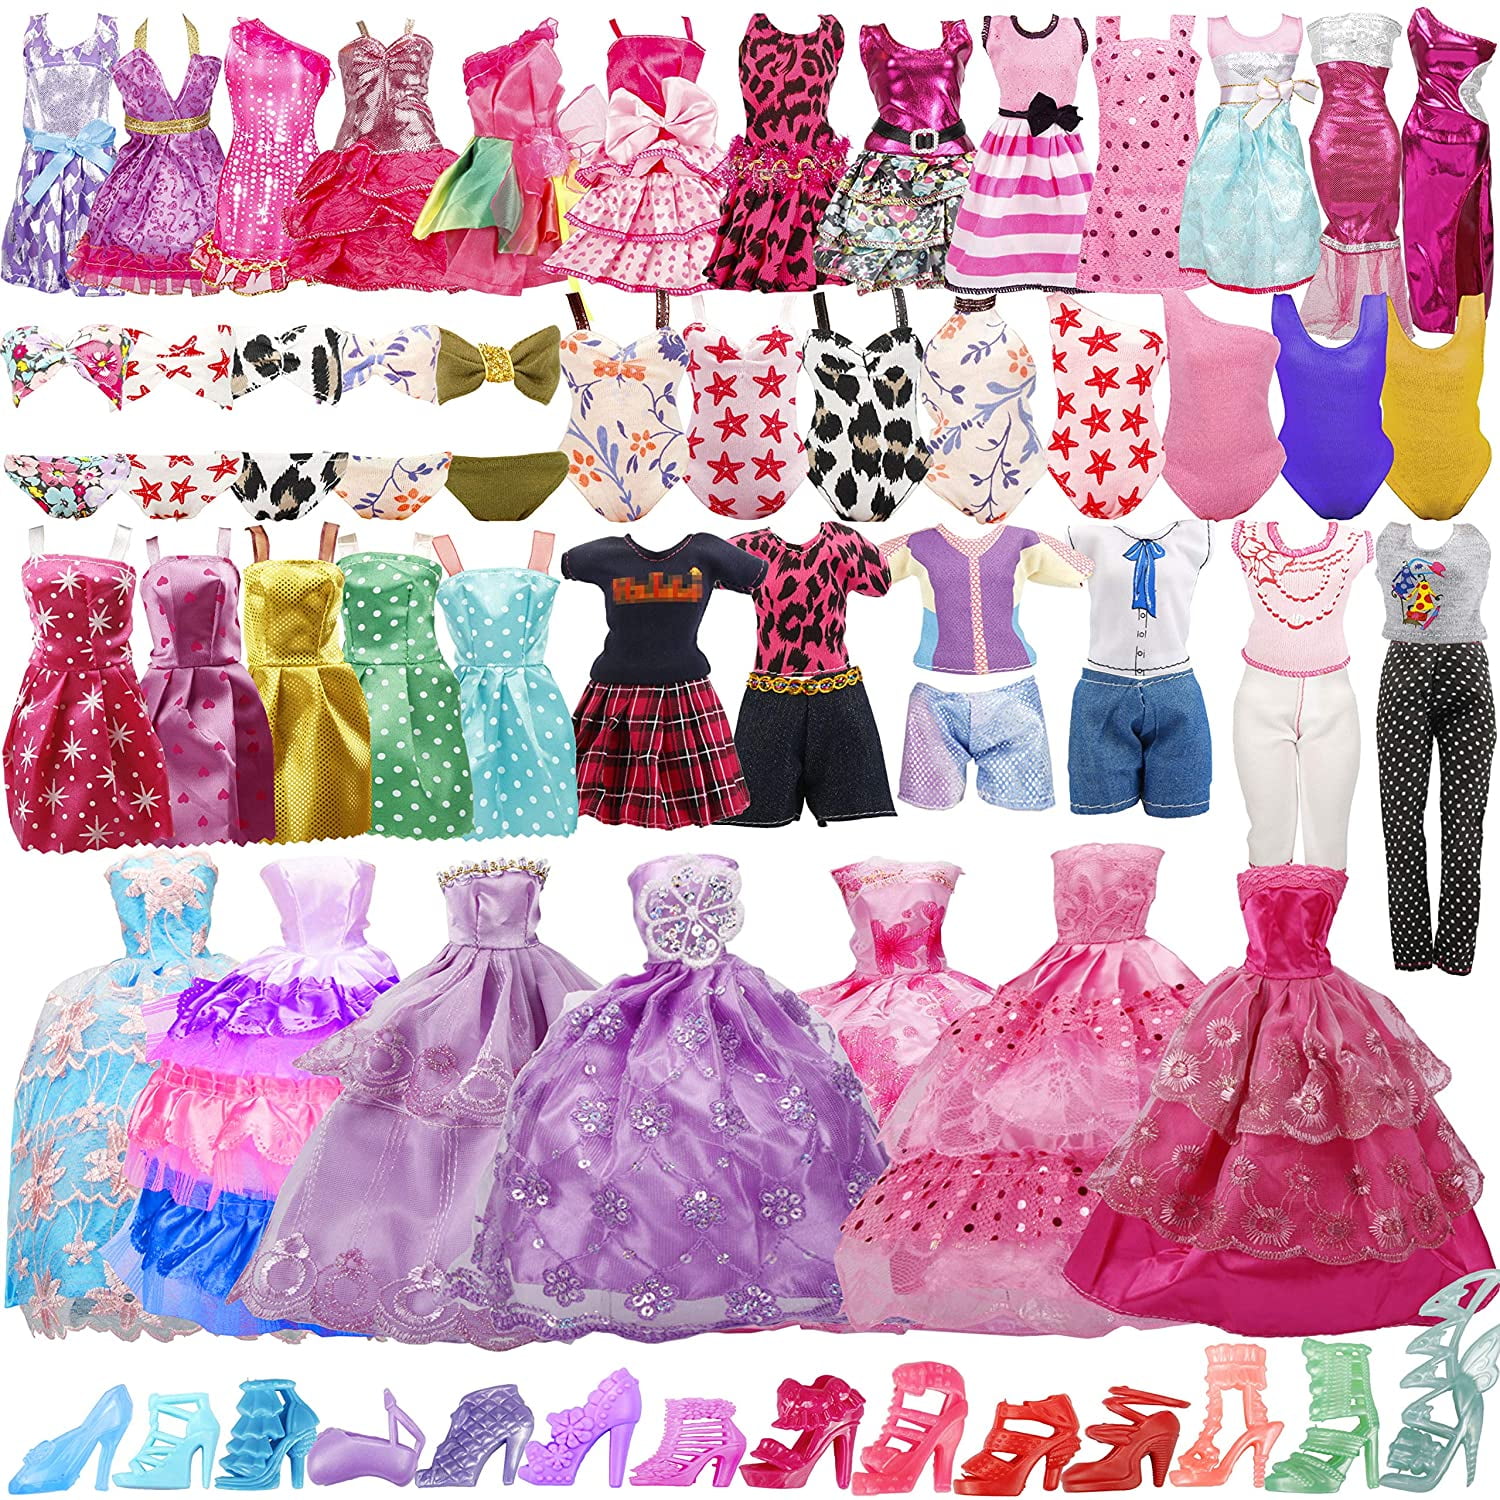 Barbie Doll clothes and Accessories, Barbie Dress, Barbie shoes, girl power  A14